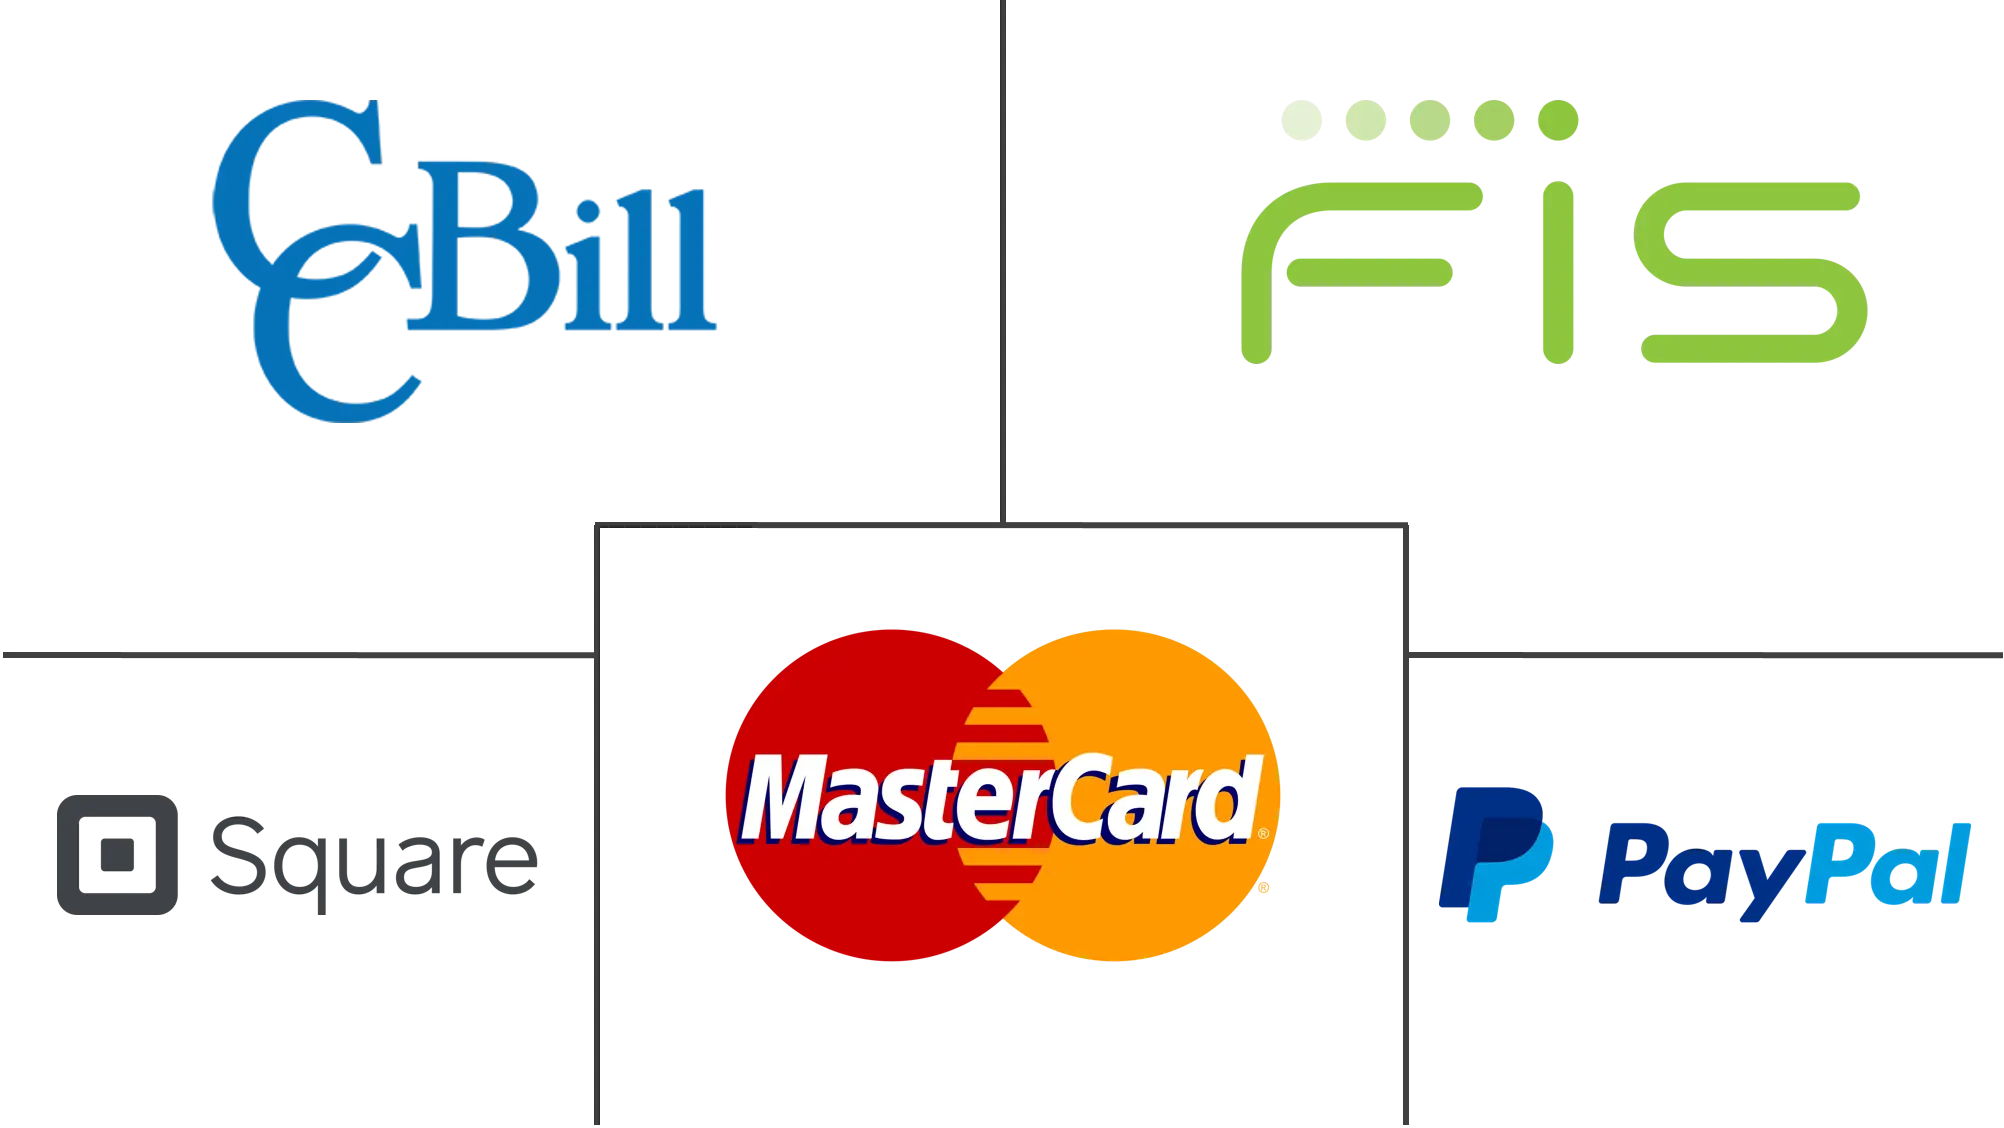 Payment Processing Solutions Market Key Players